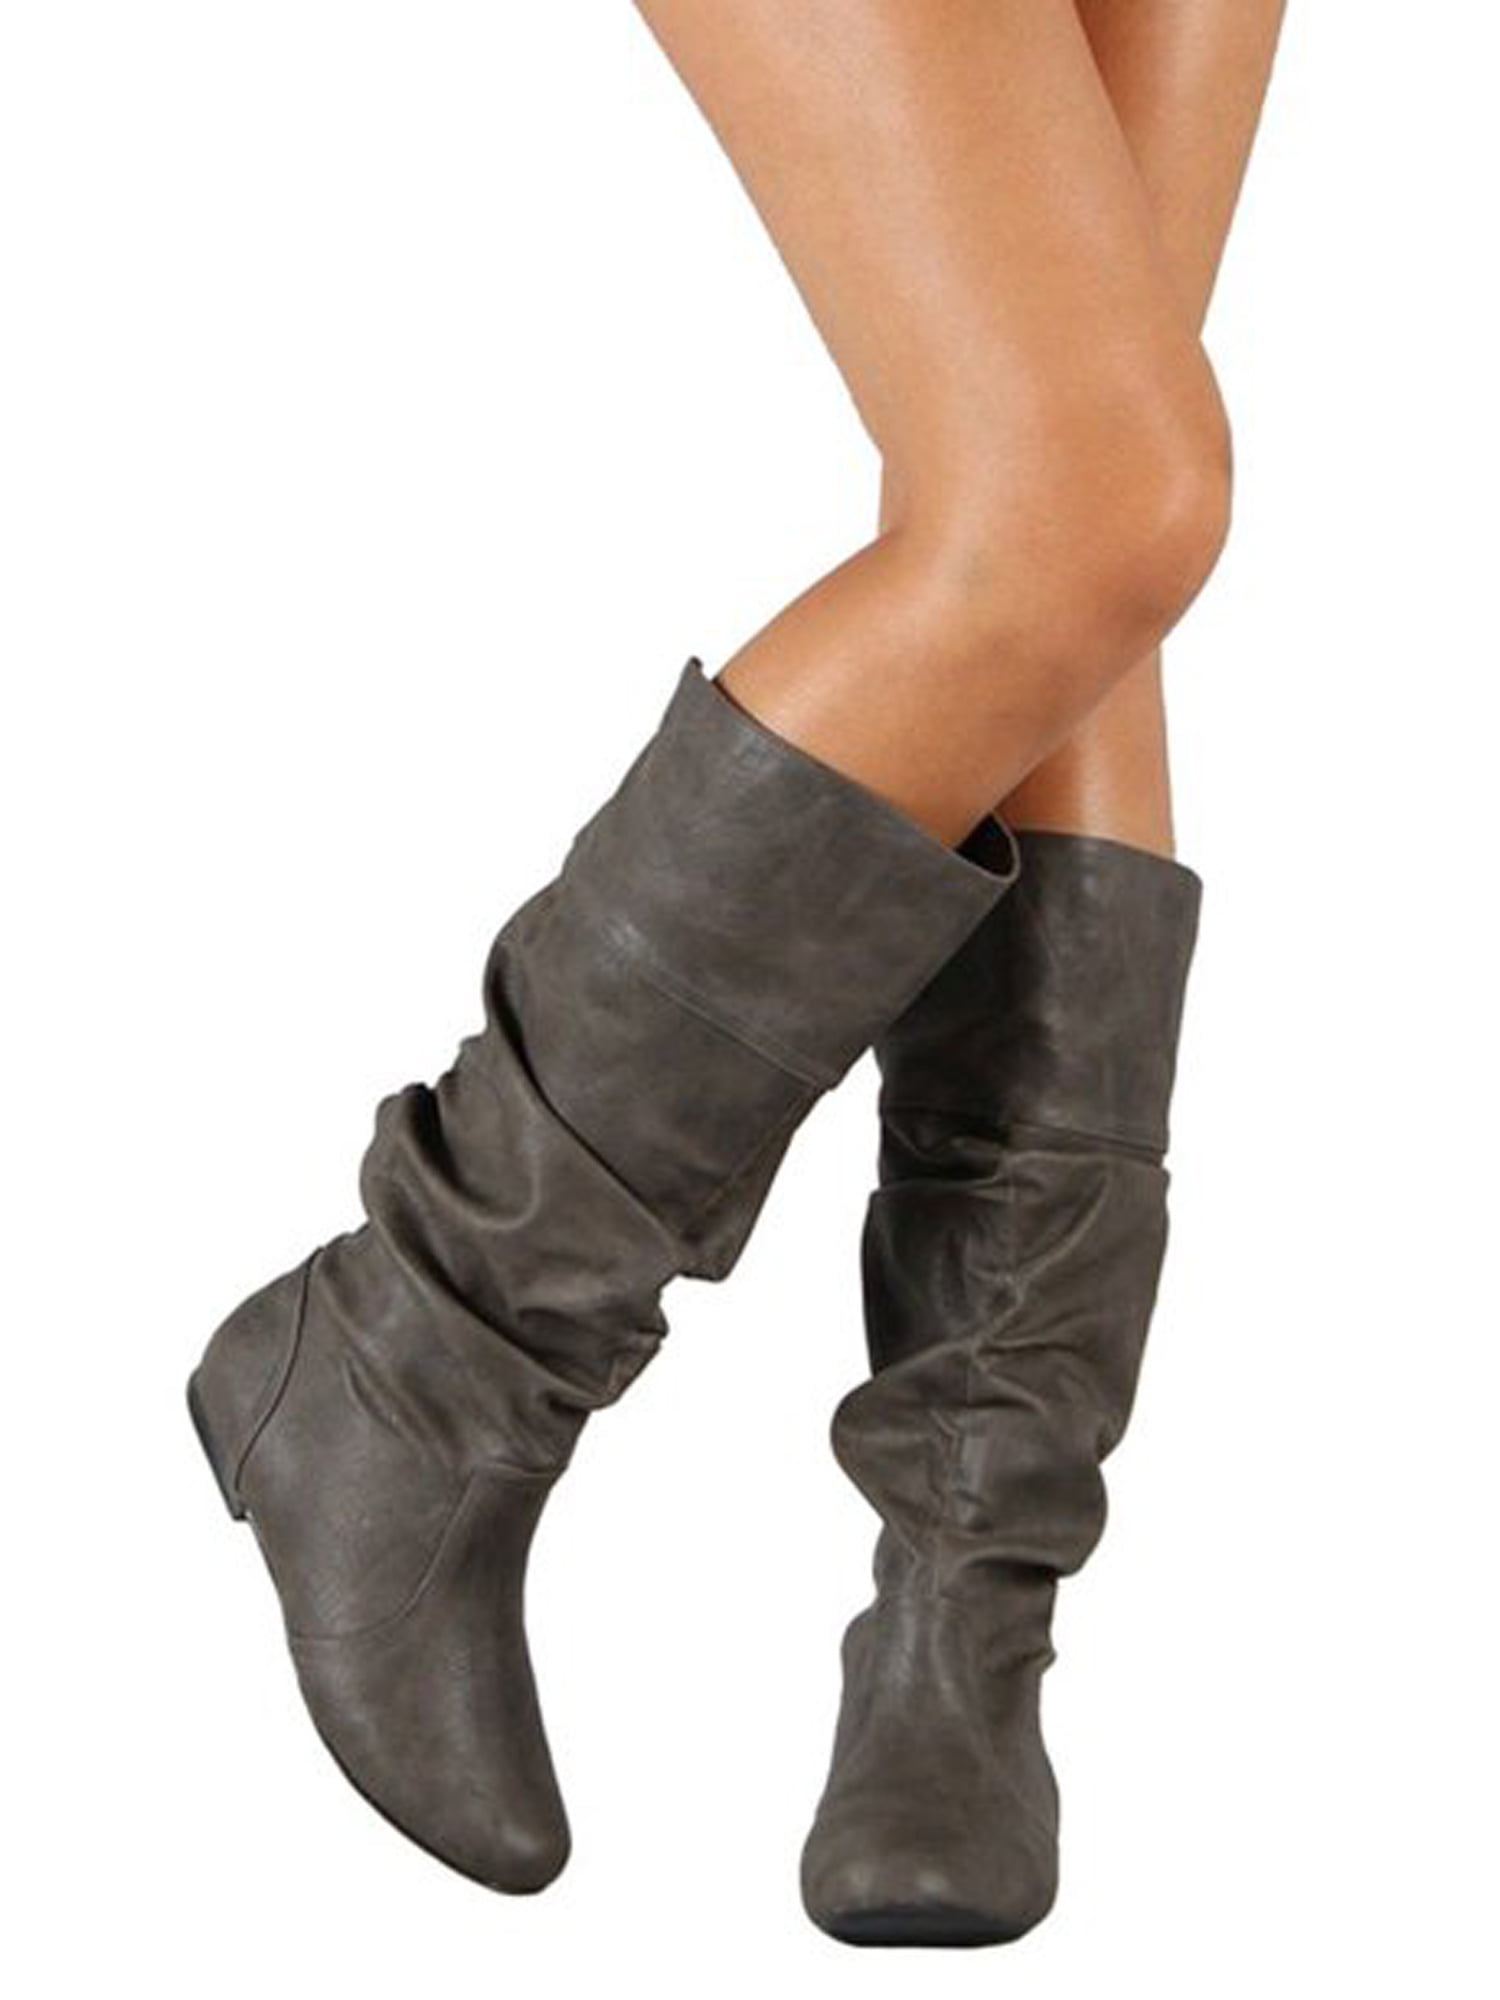 Women Leather Knee Calf High Slouch Boots Ladies Casual Wide Leg Flat Shoes Size